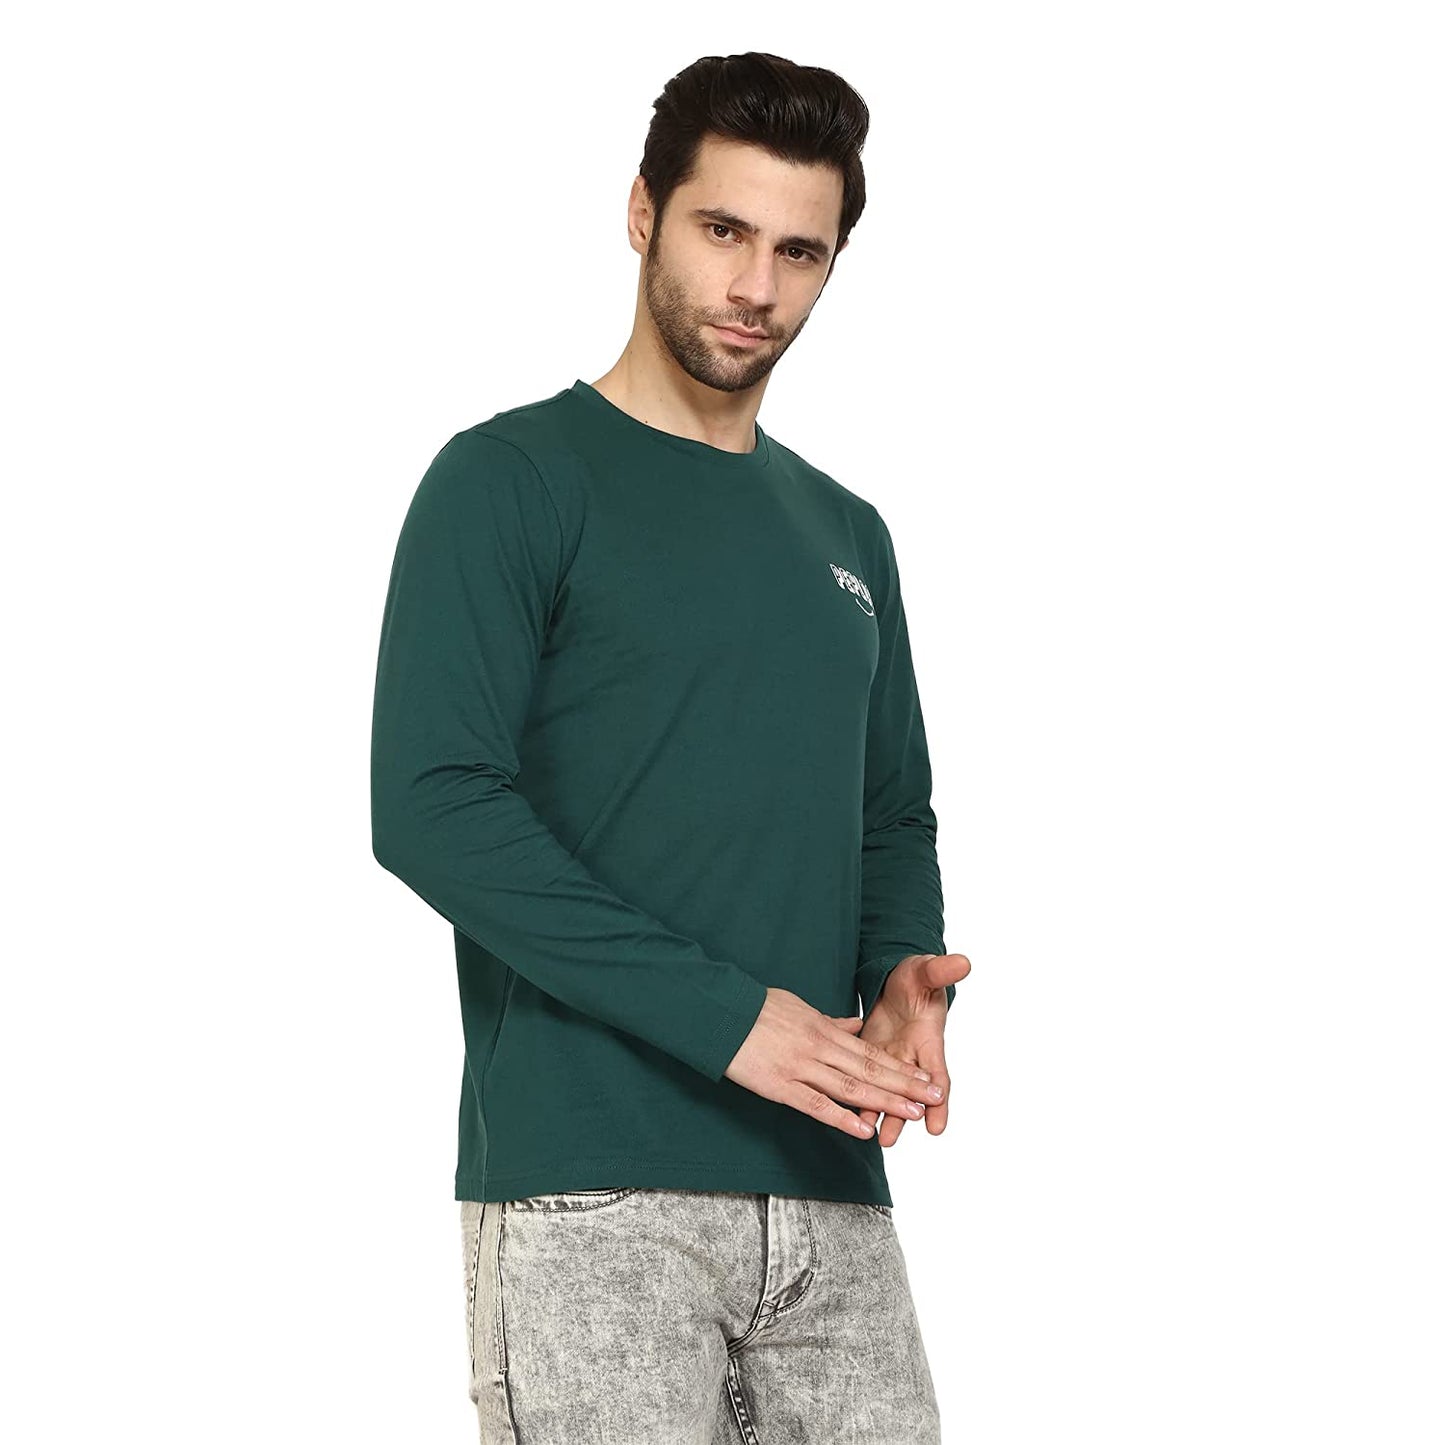 Regular Fit Green Color Printed Full Sleeve Premium Class Cotton T-Shirt for Men